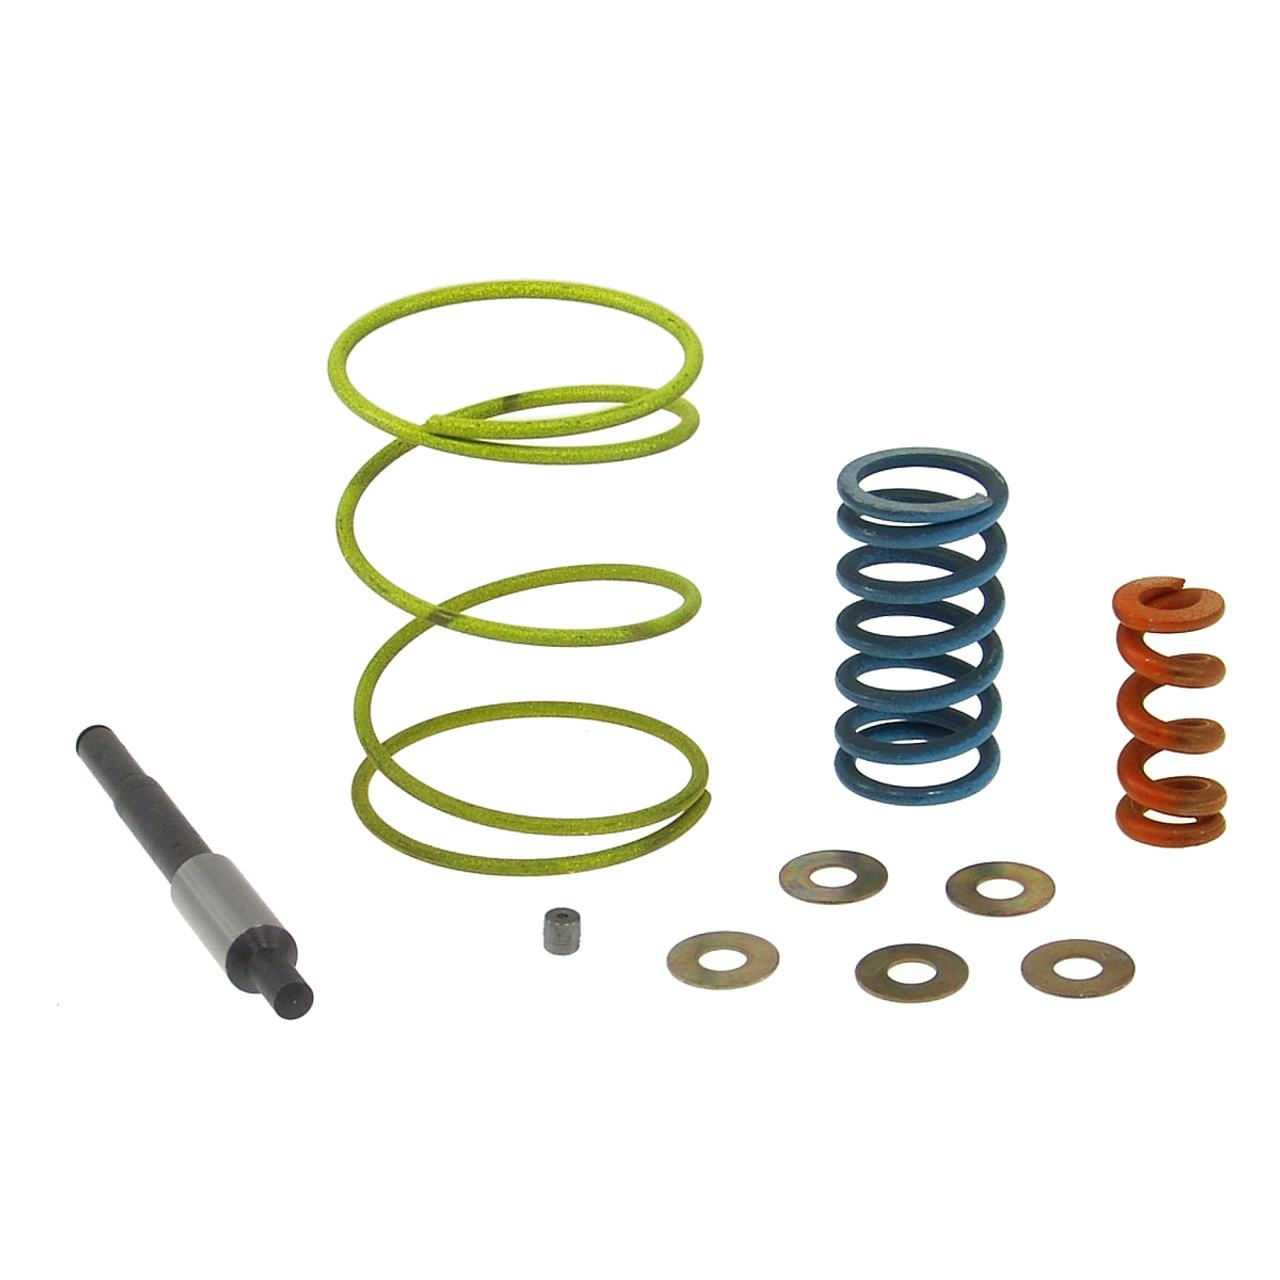 TH400 Reverse Cushion Kit by TransGo.  Buy now from Global Transmission Parts.  The lowest prices on the web.